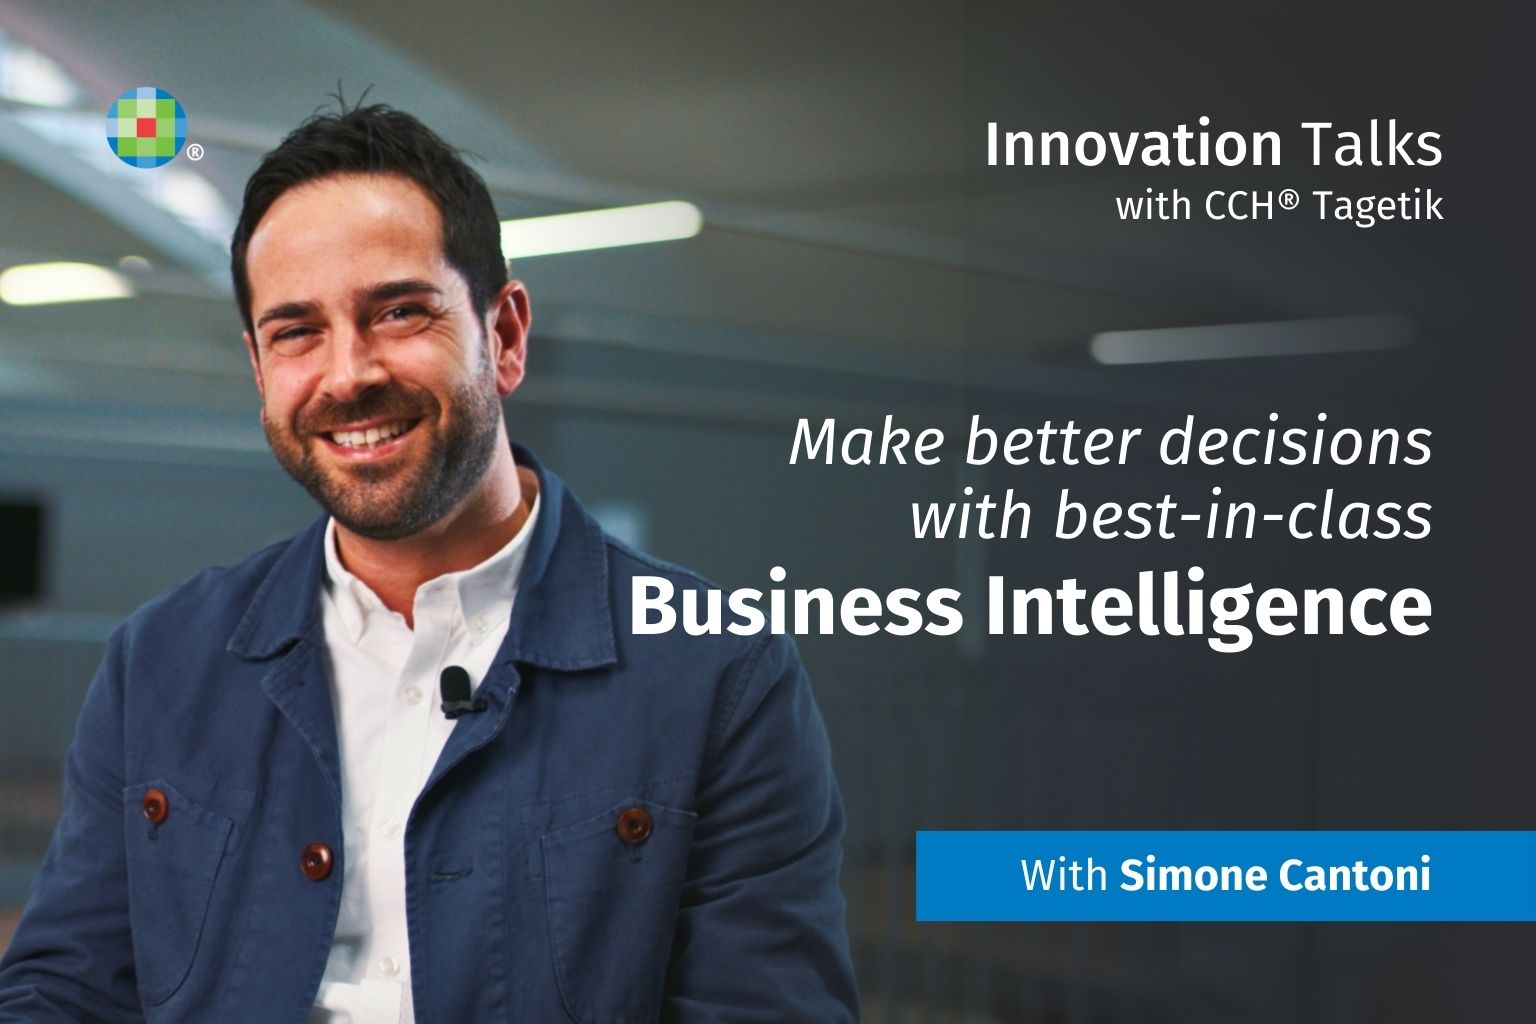 Make better decisions with best-in-class Business Intelligence